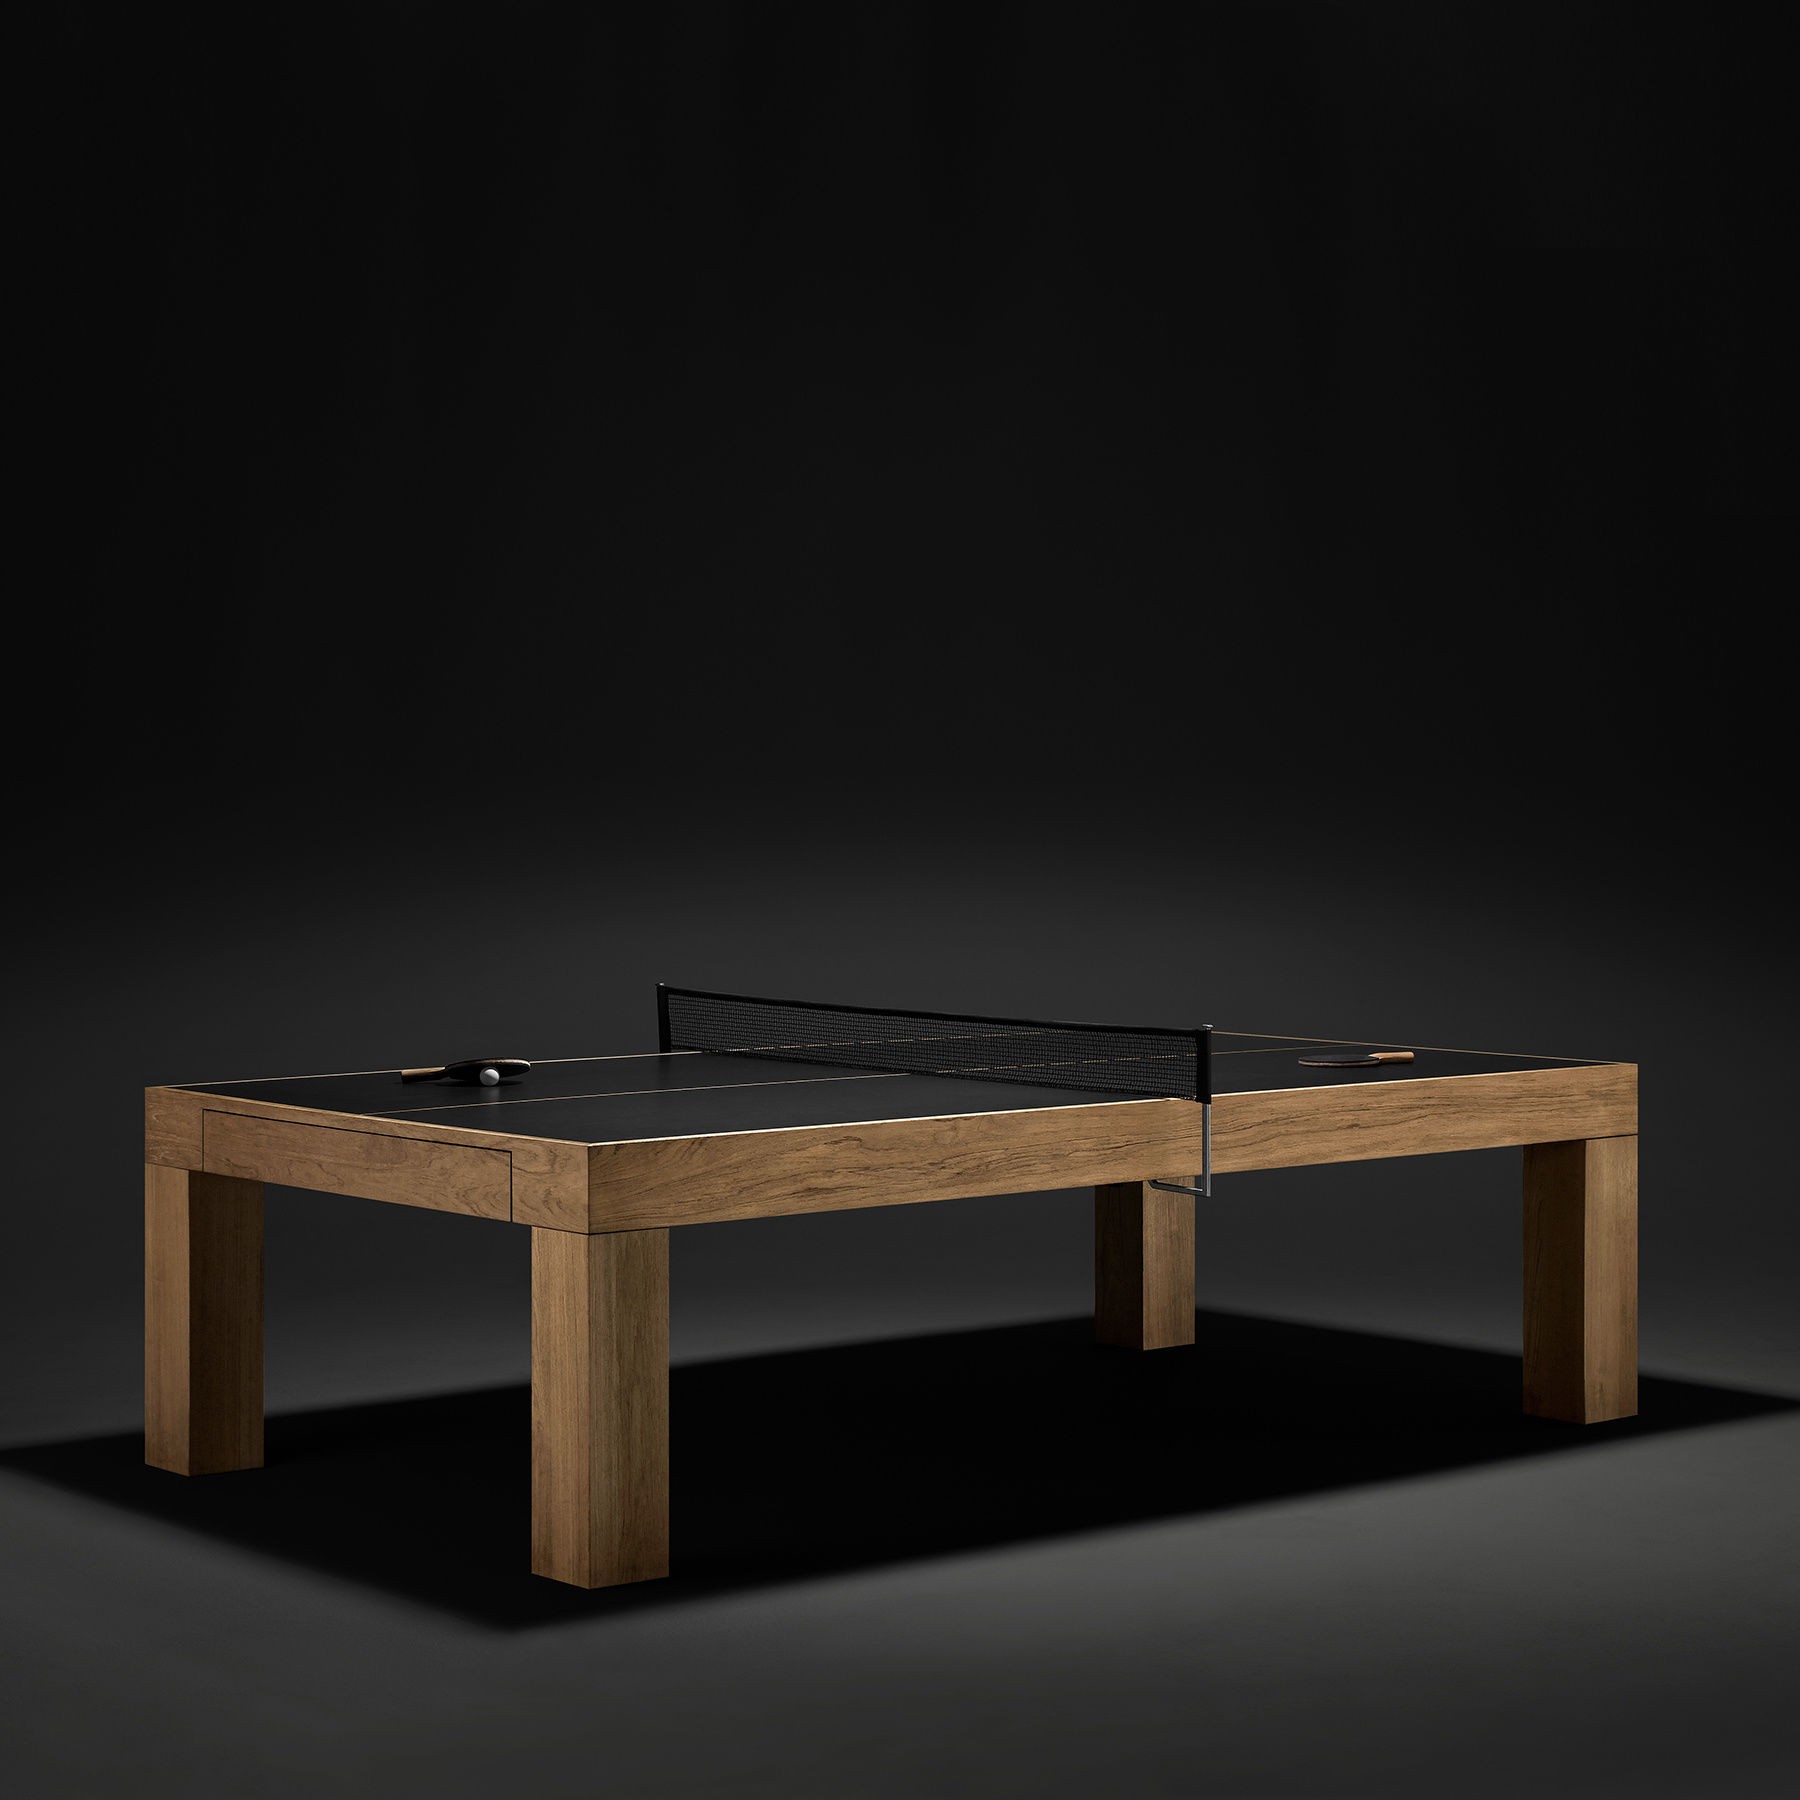 James perse ping pong table an absolutely gorgeous dream of